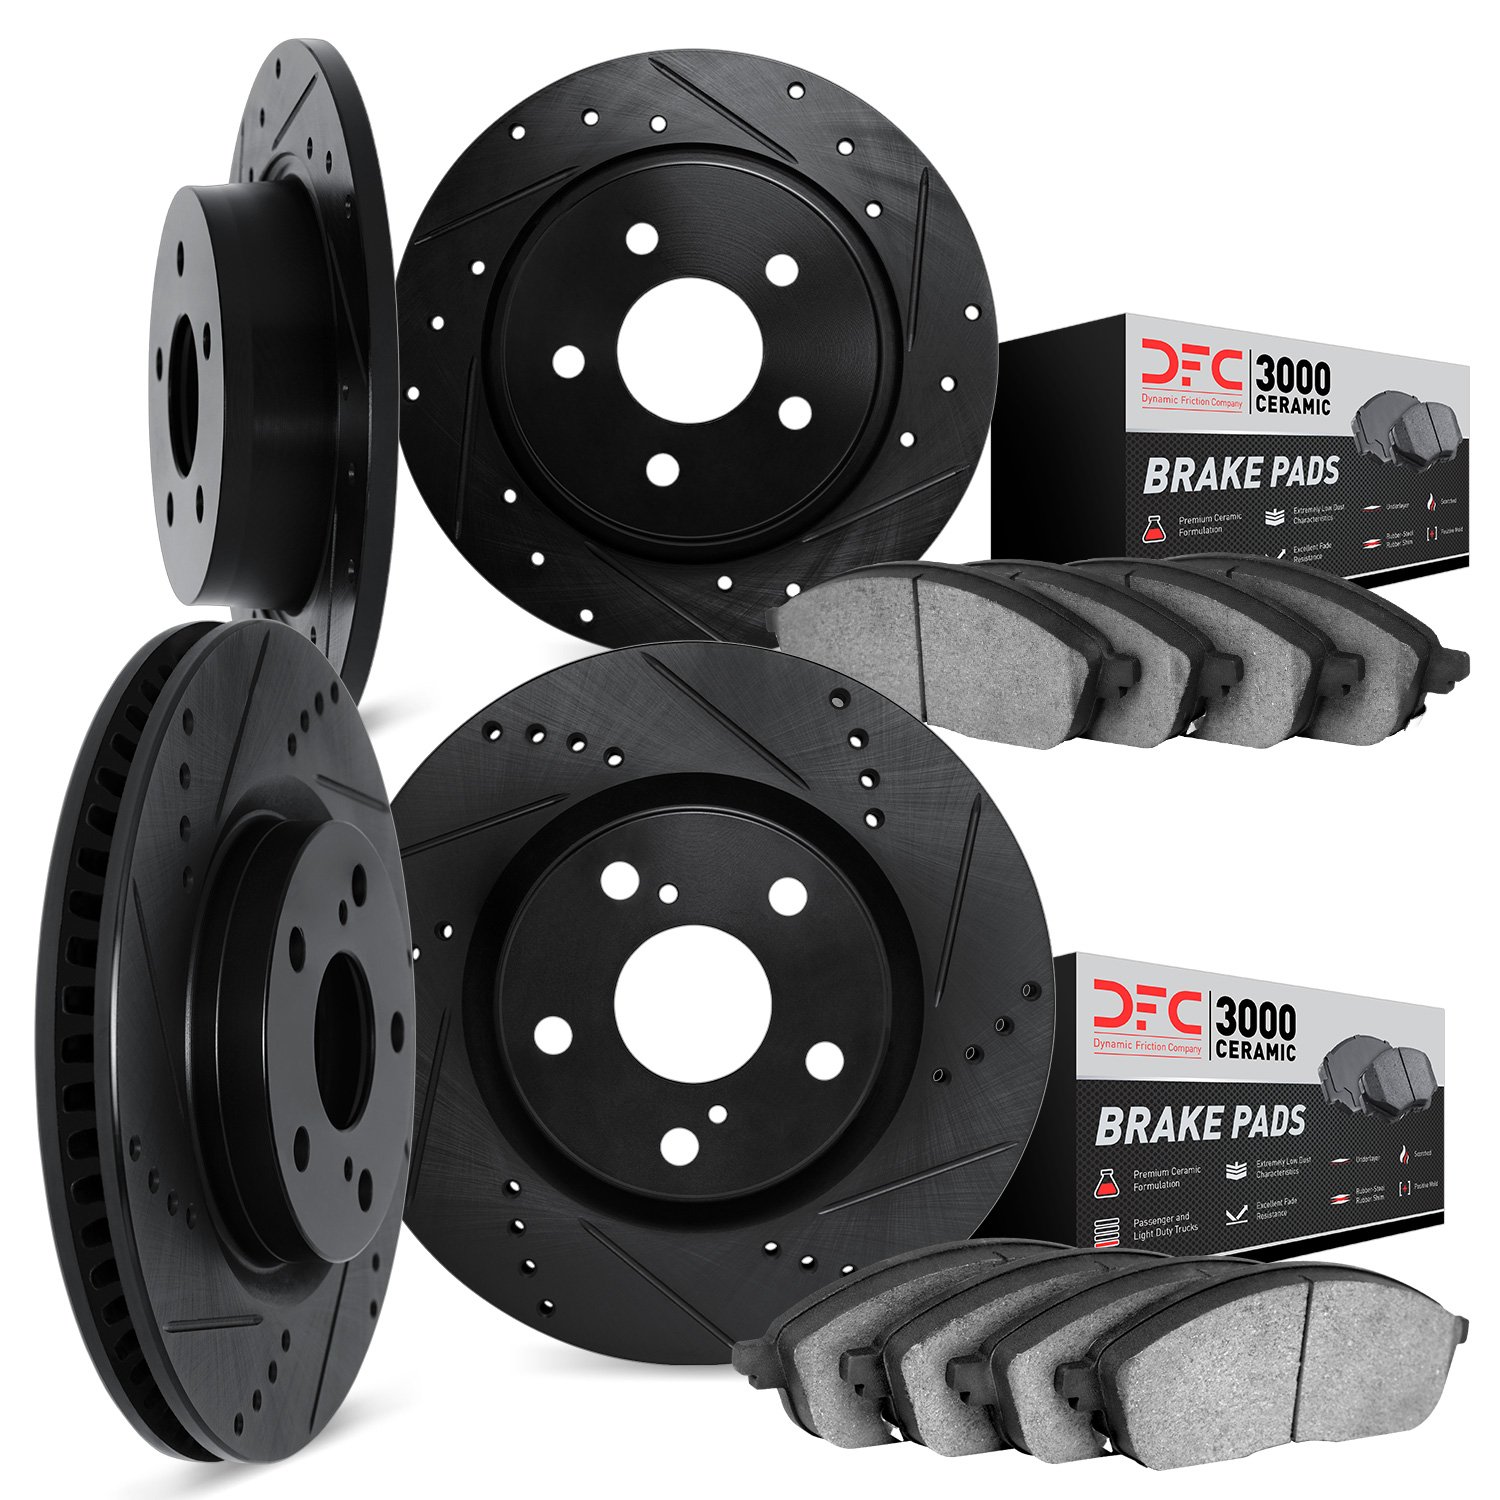 8304-59074 Drilled/Slotted Brake Rotors with 3000-Series Ceramic Brake Pads Kit [Black], 2013-2017 Acura/Honda, Position: Front